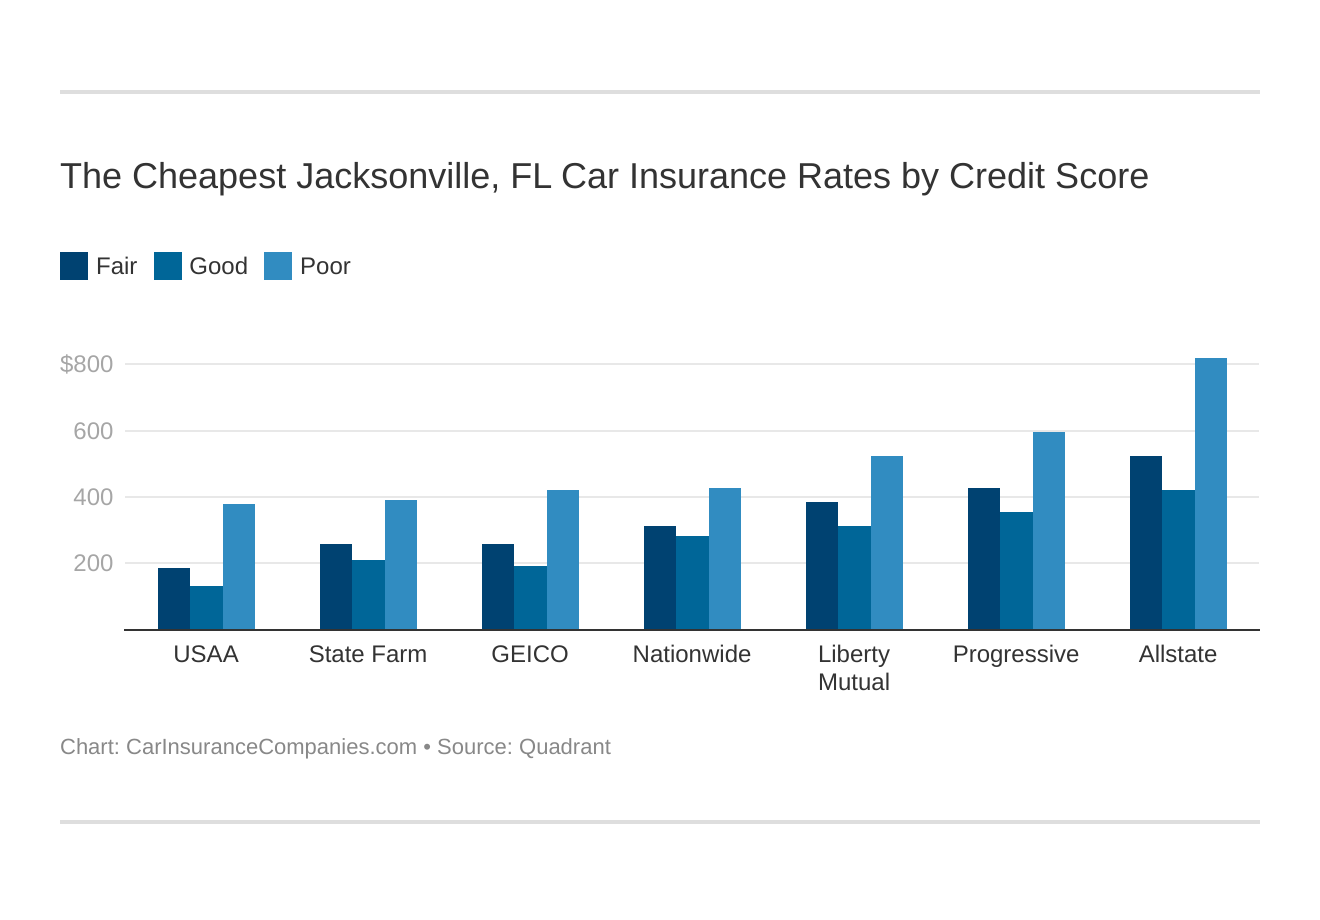 The Cheapest Jacksonville, FL Car Insurance Rates by Credit Score